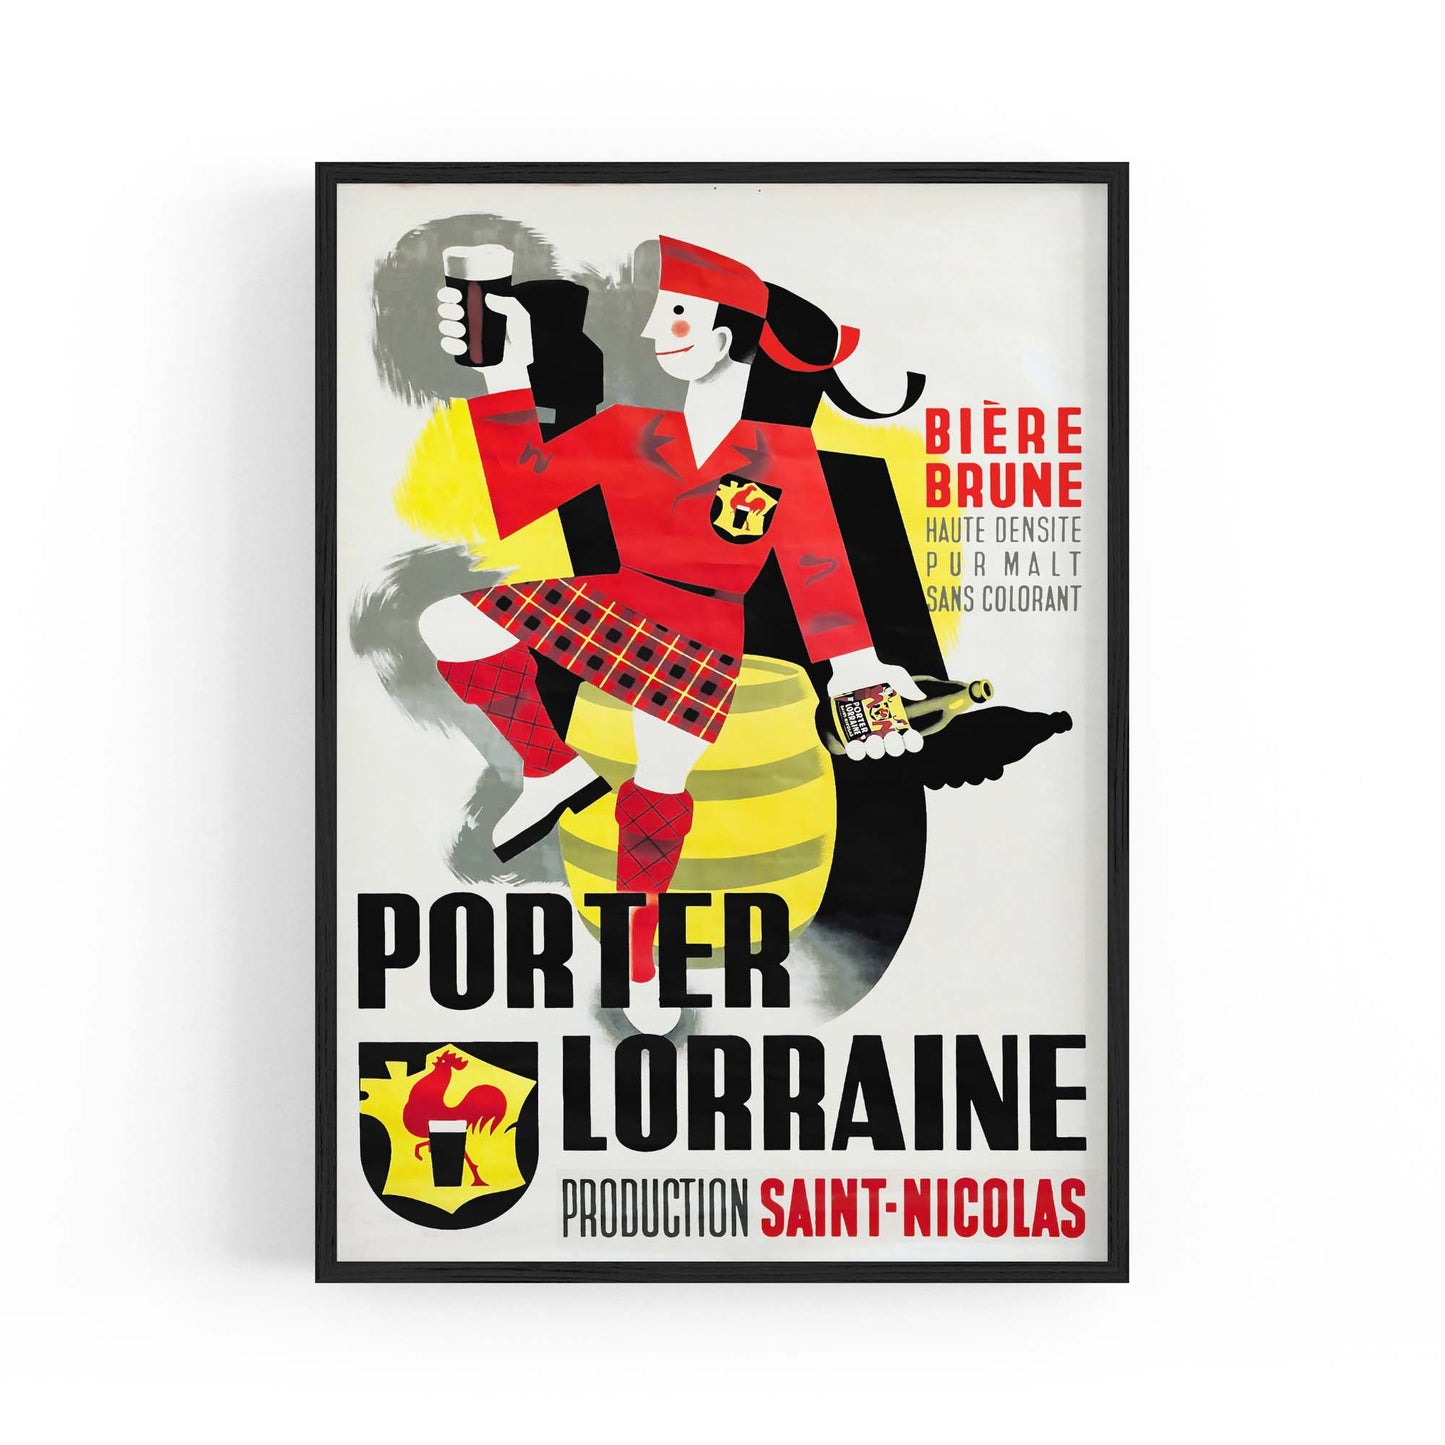 Porter Lorraine Vintage Drinks Advert Wall Art - The Affordable Art Company